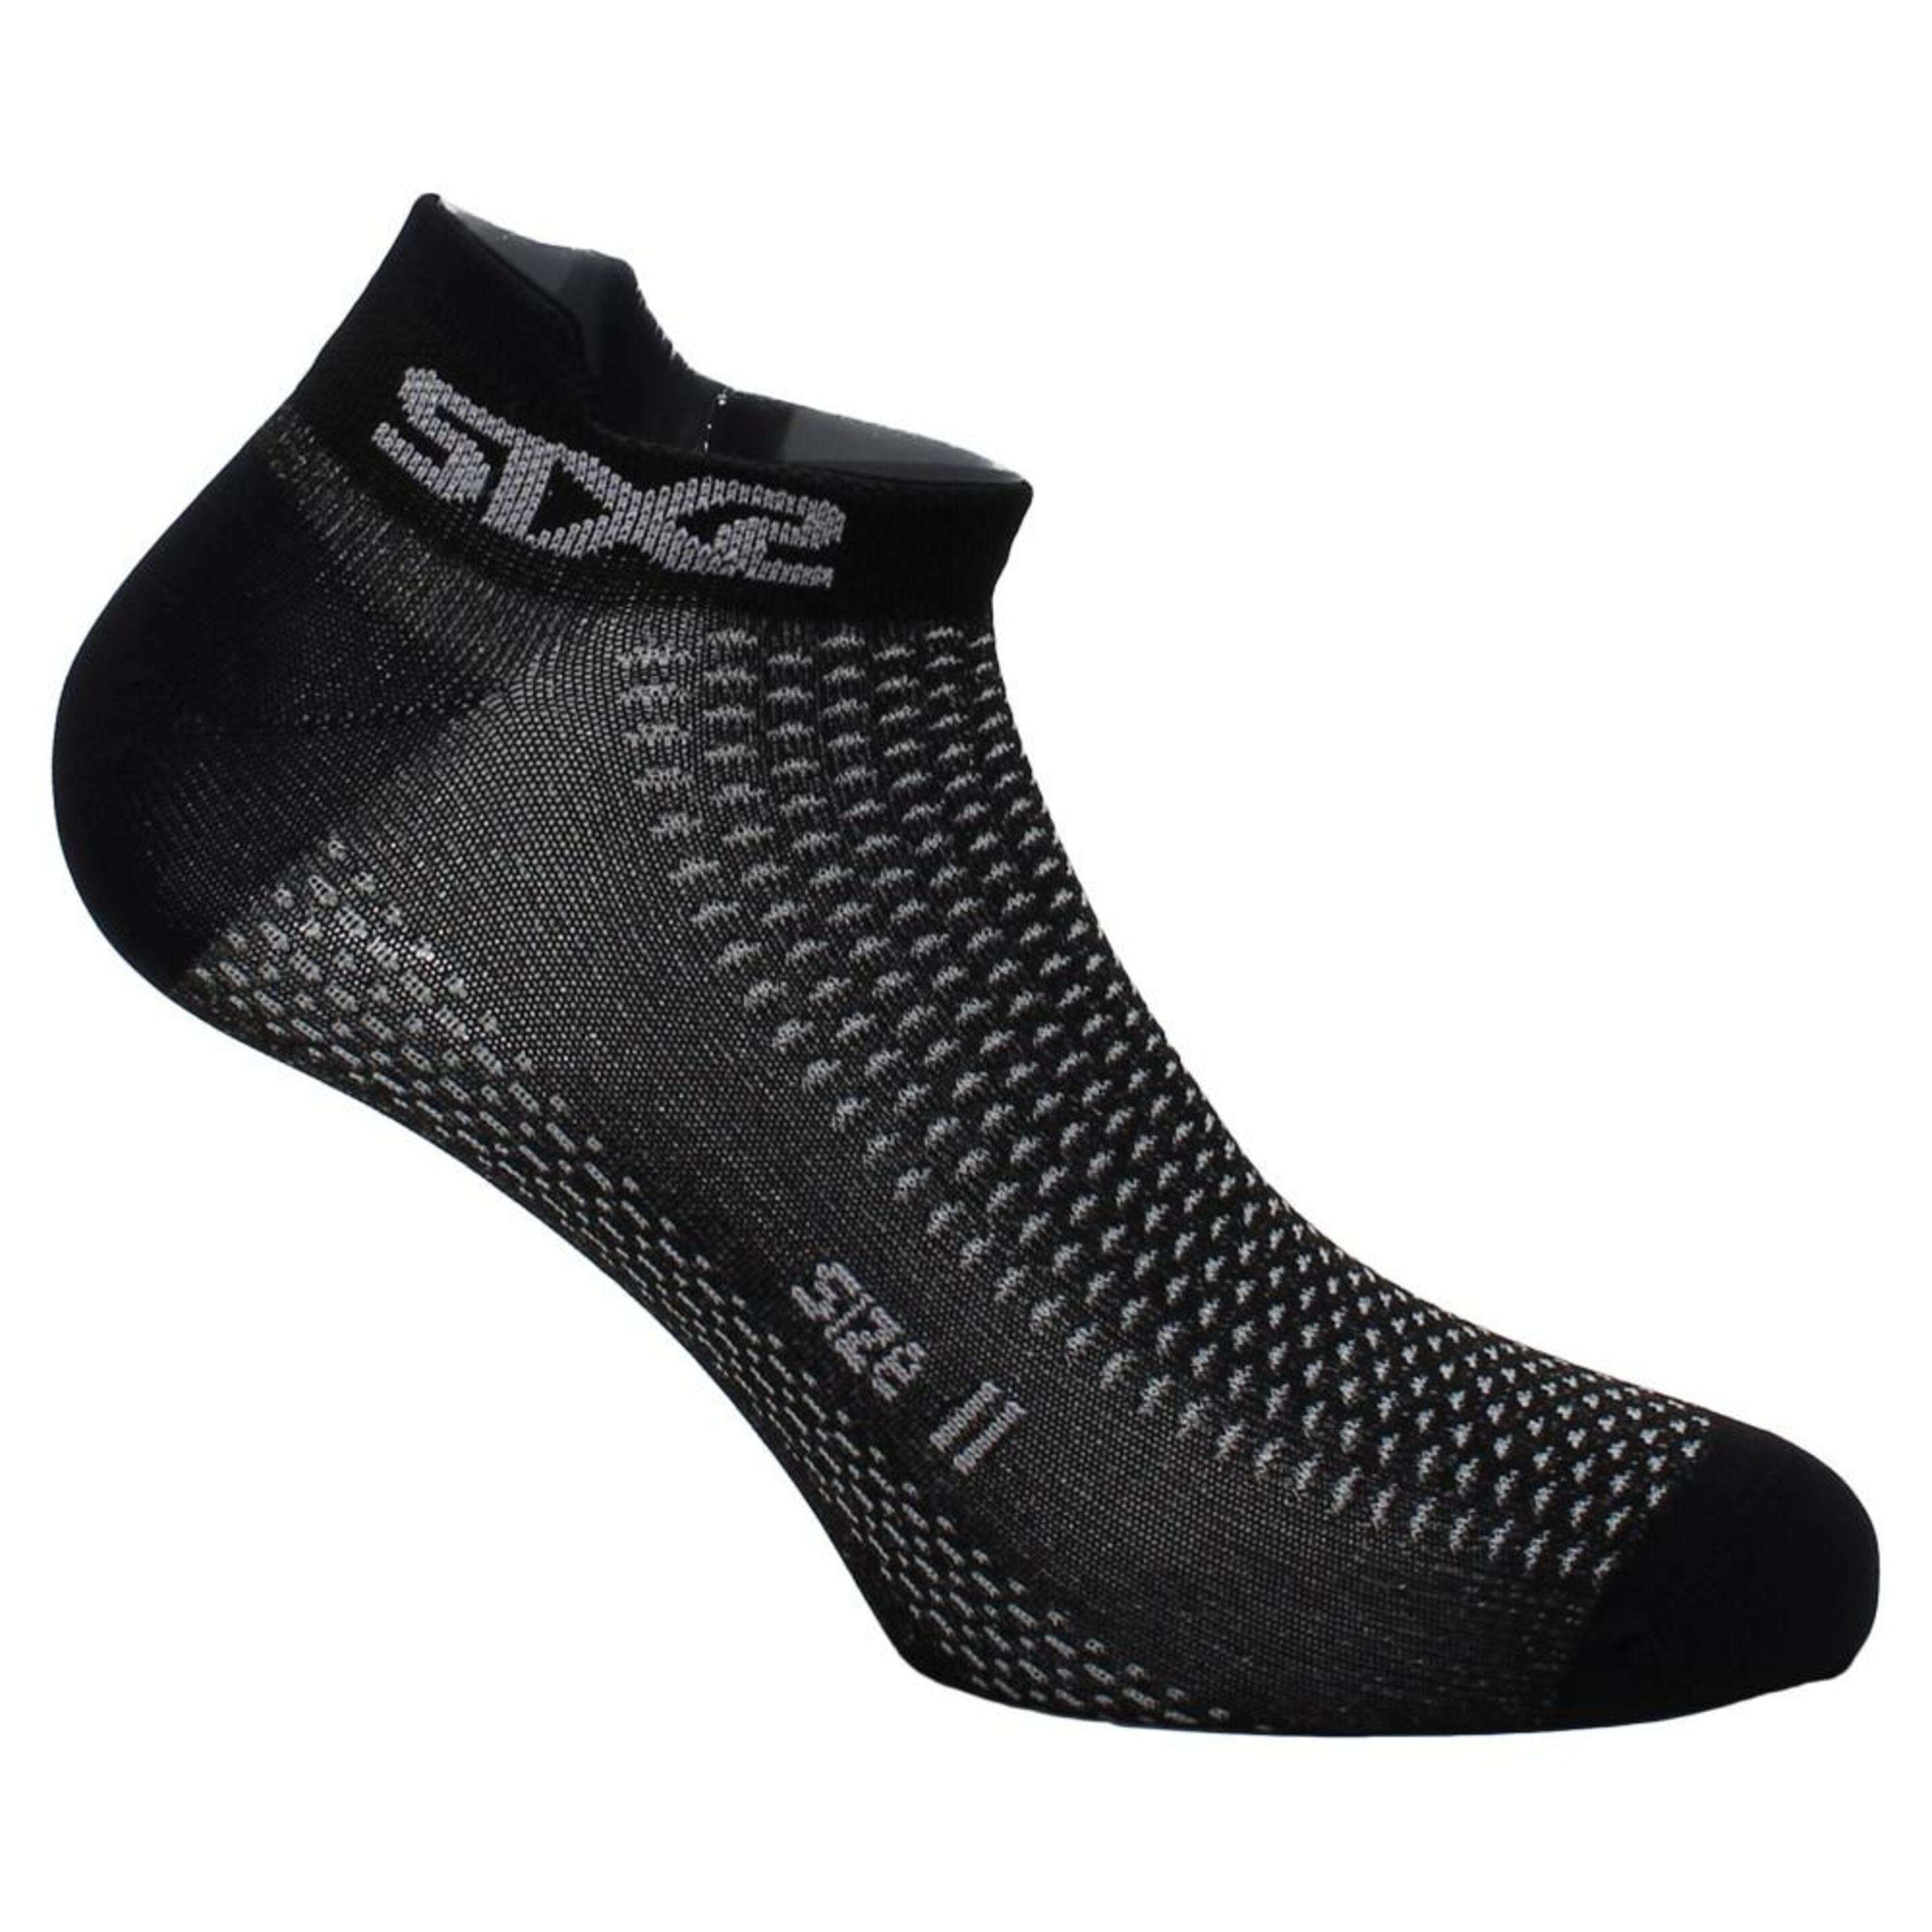 Calcetines Ciclismo Sixs Fant S - Calcetines de Talle bajo  MKP